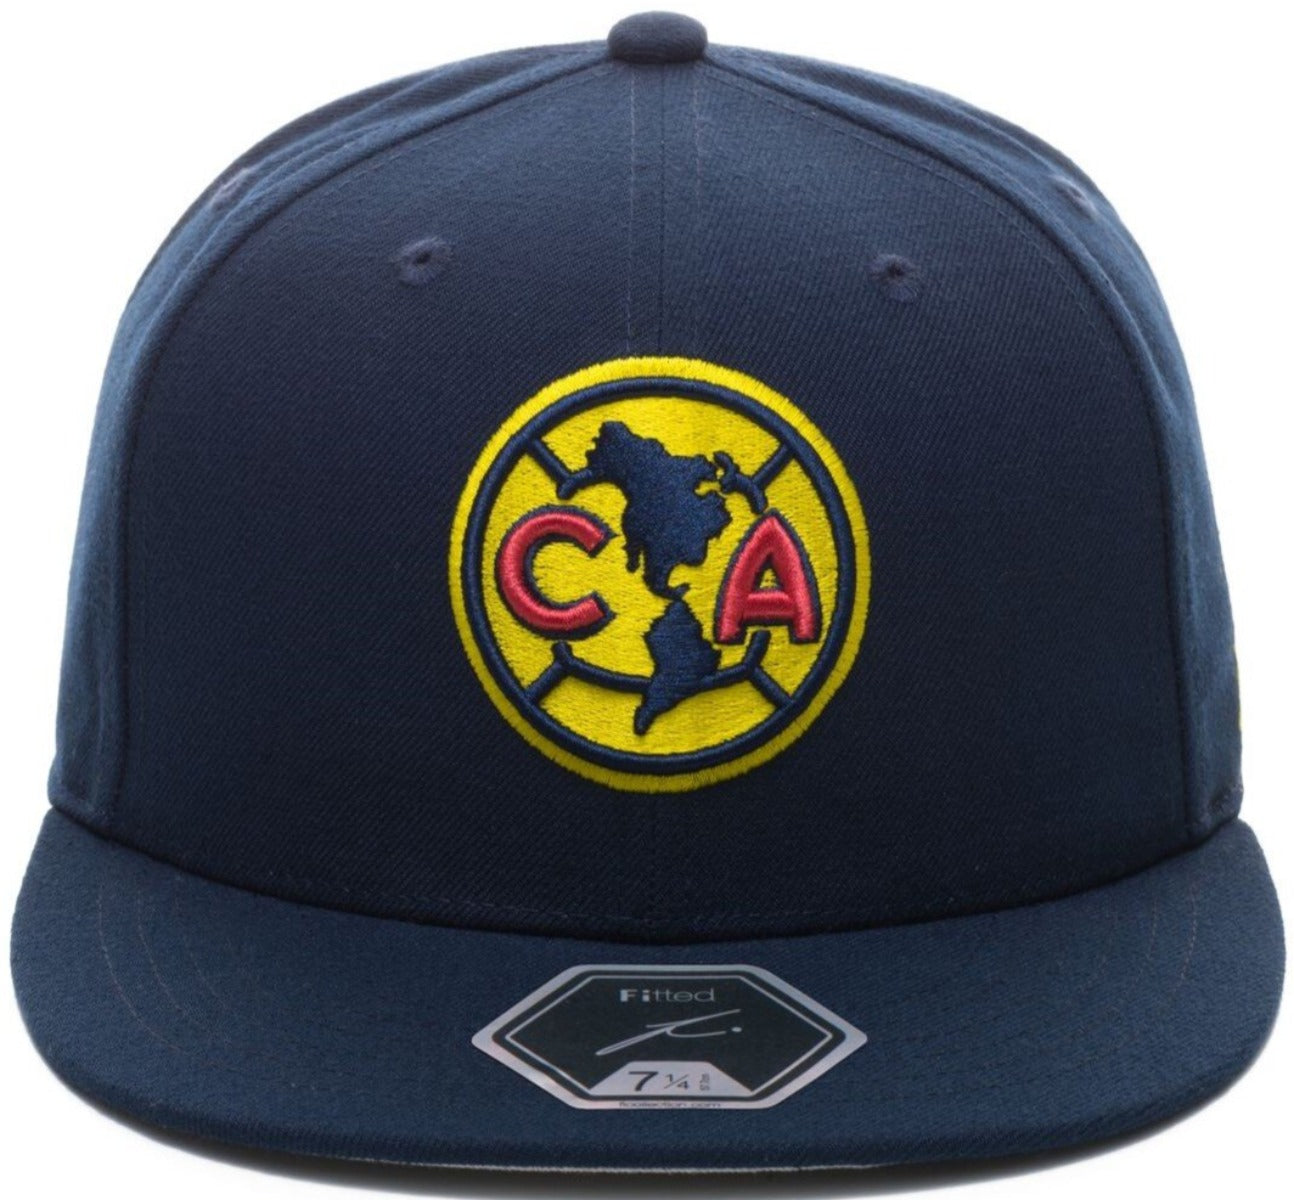 Fi Collections Club America Fitted Hat